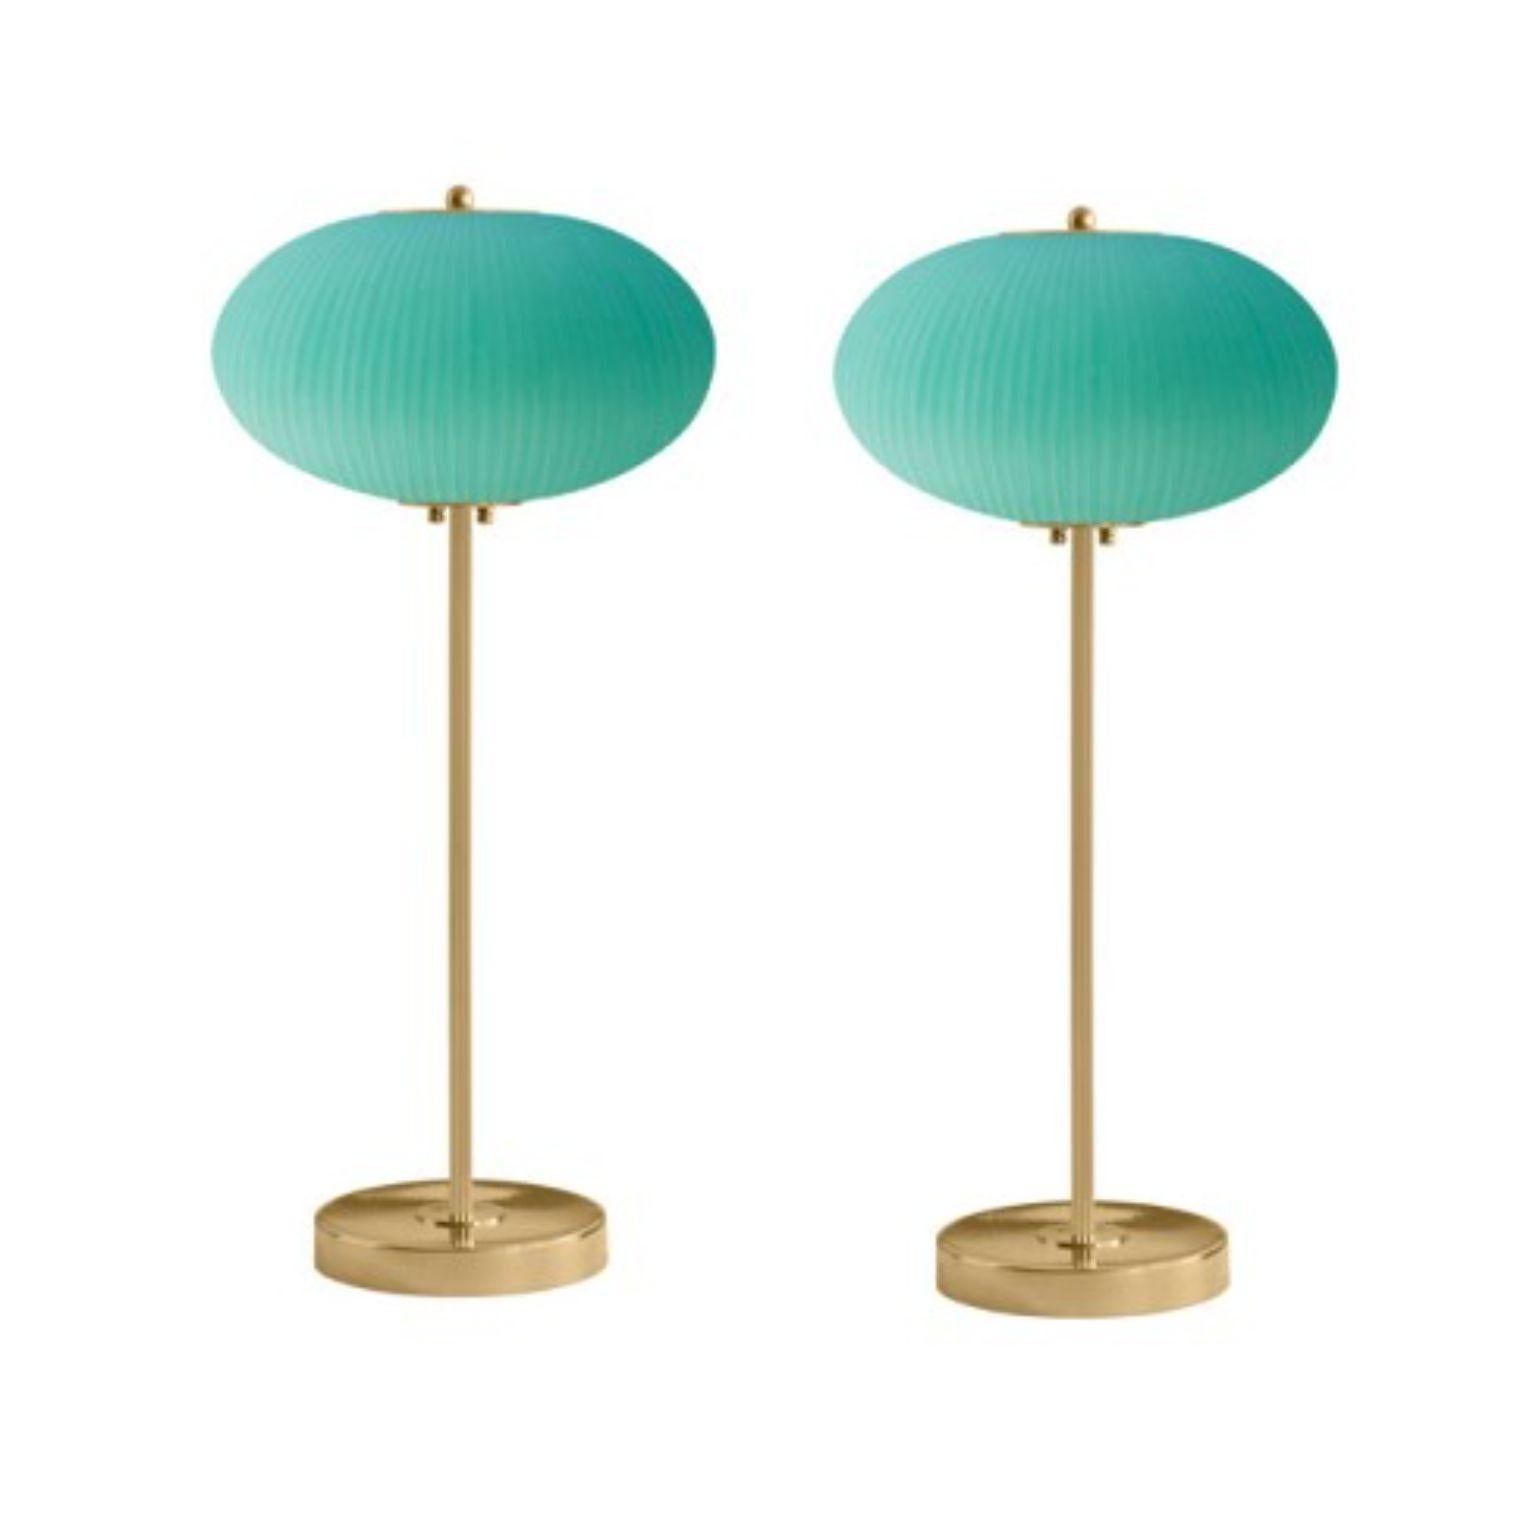 Table lamp China 07 by Magic Circus Editions
Dimensions: H 70 x W 32 x D 32 cm
Materials: Brass, mouth blown glass sculpted with a diamond saw
Colour: jade green

Available finishes: Brass, nickel
Available colours: enamel soft white, soft